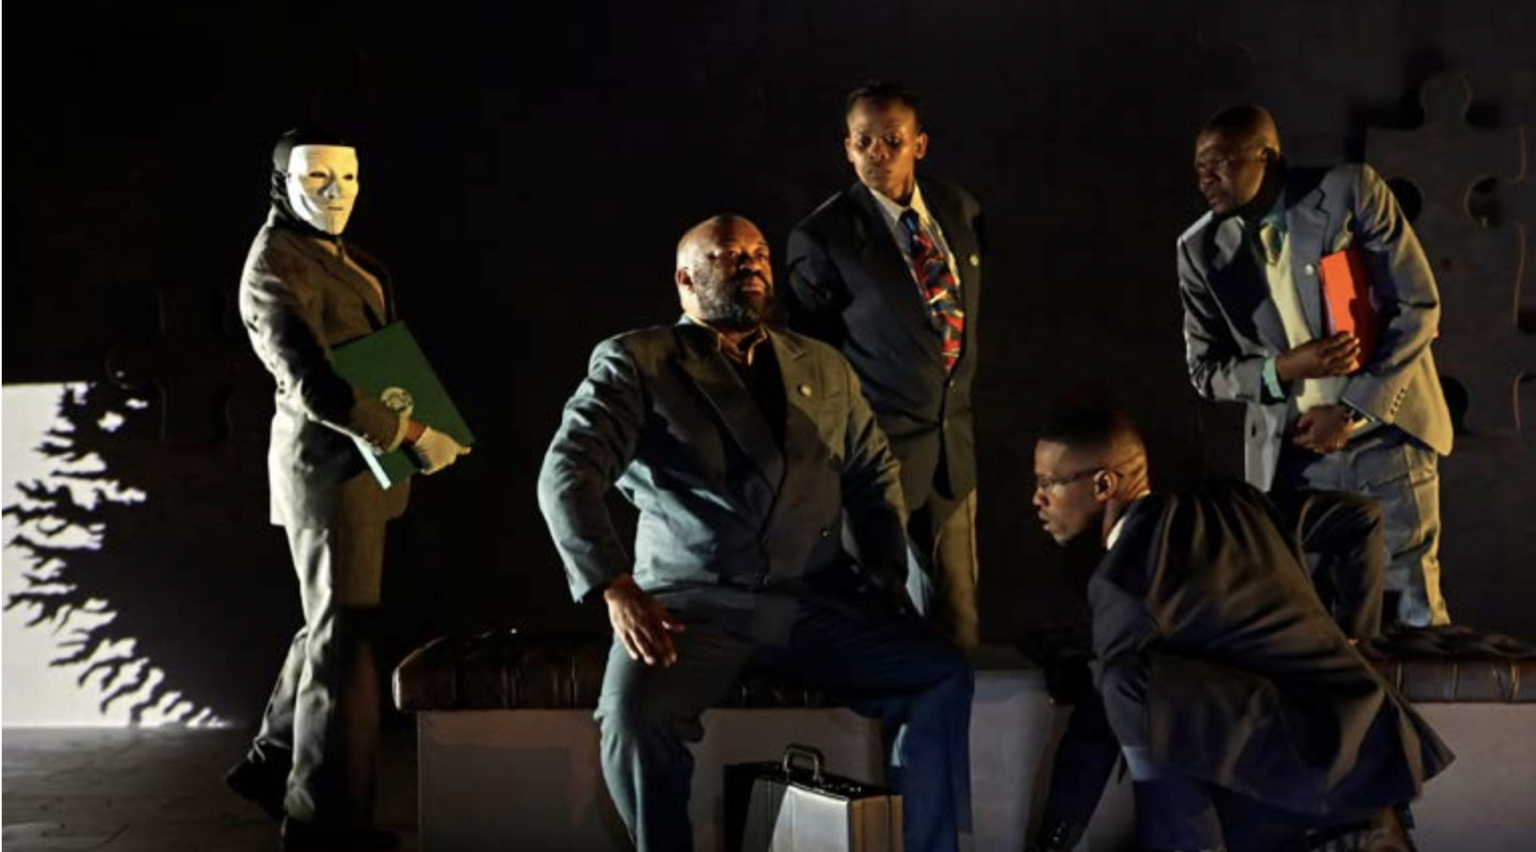 Briary, blackmail, and bullying in Khongolose Khommanding Khommisars. Photo: Courtesy of the National Arts Festival